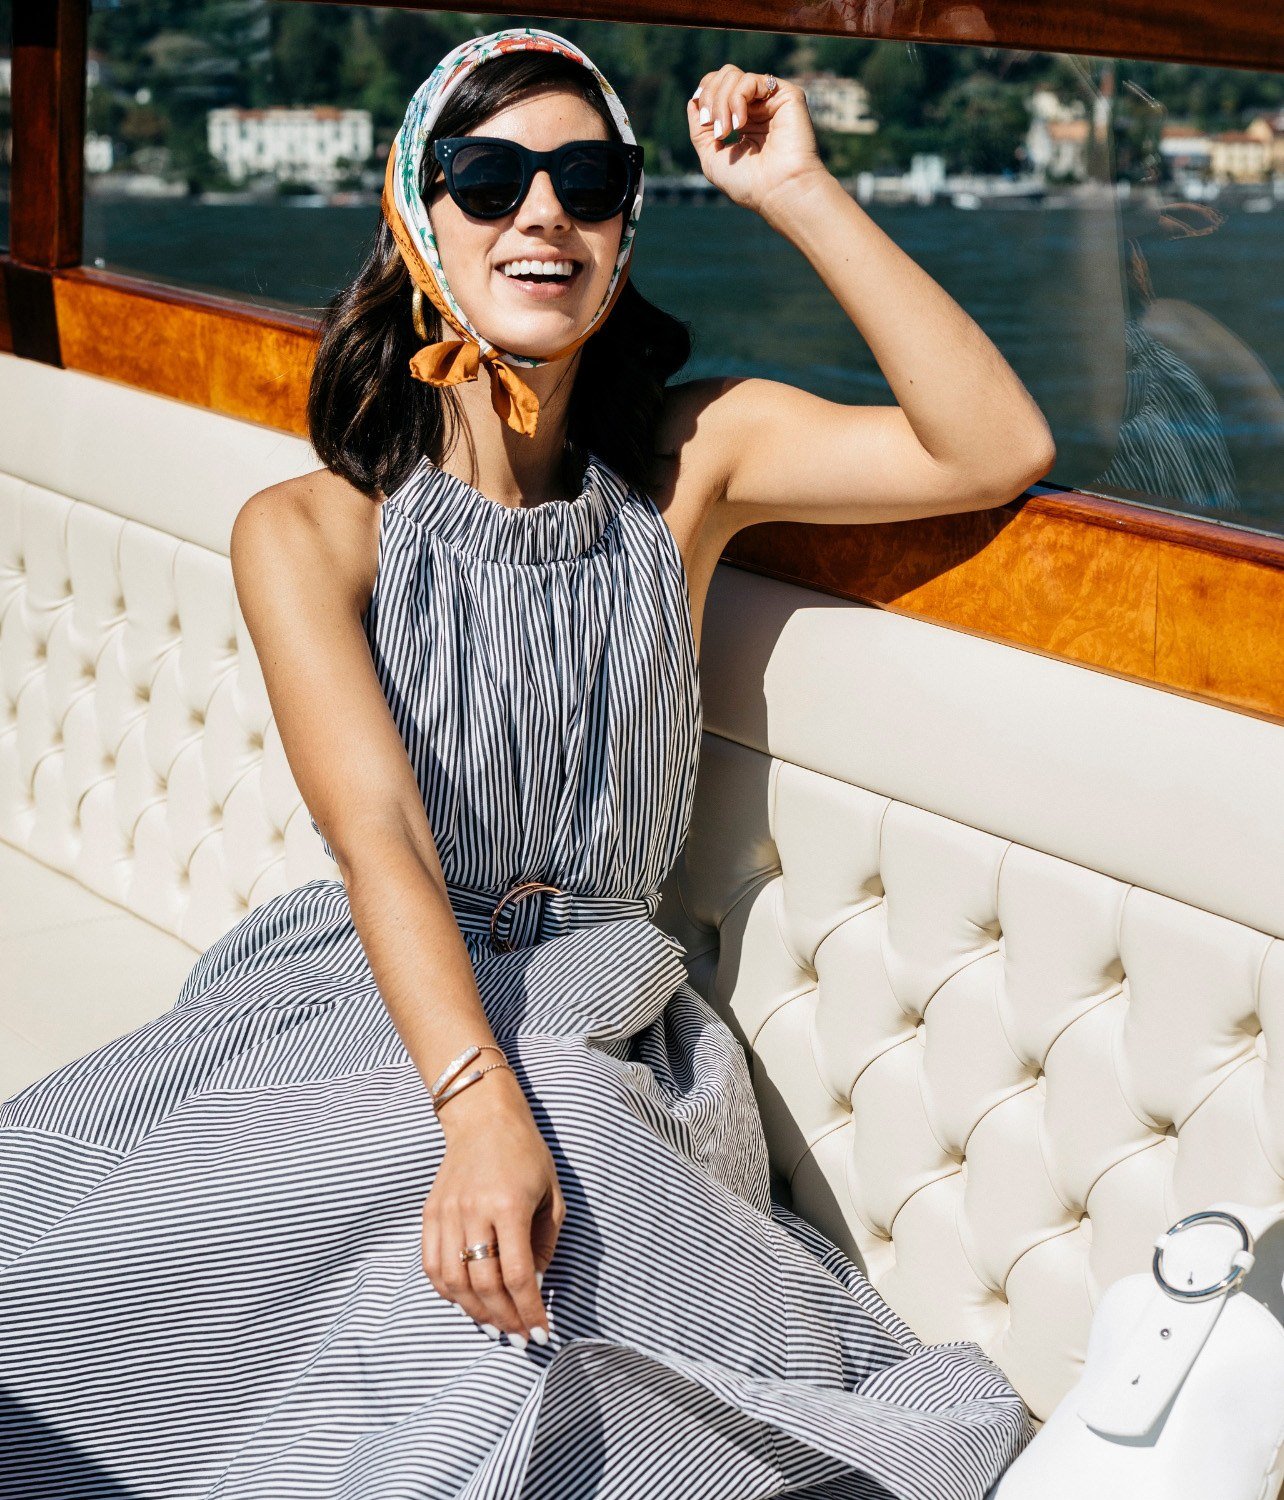 Model on a boat in Lake Como wearing a striped dress, headscarf, and sunglasses